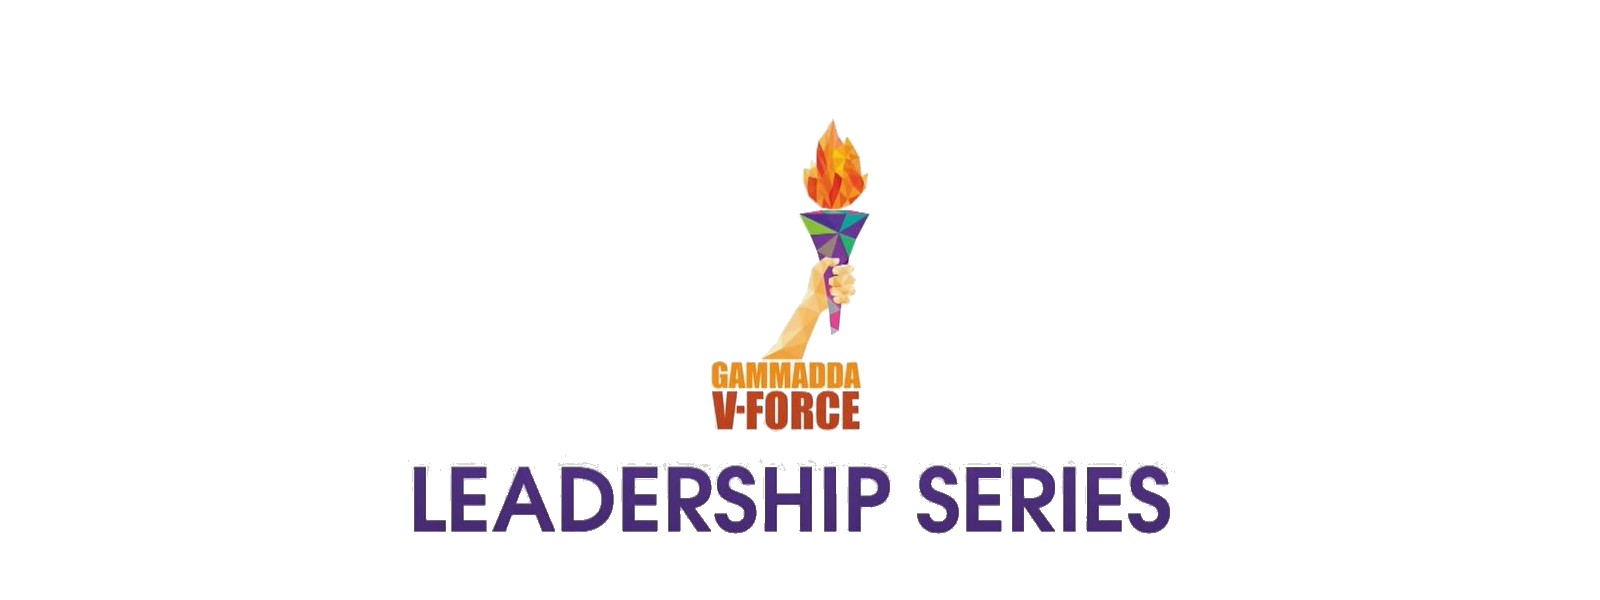 ‘Leaders For Tomorrow’ by #VForce Youth Movement